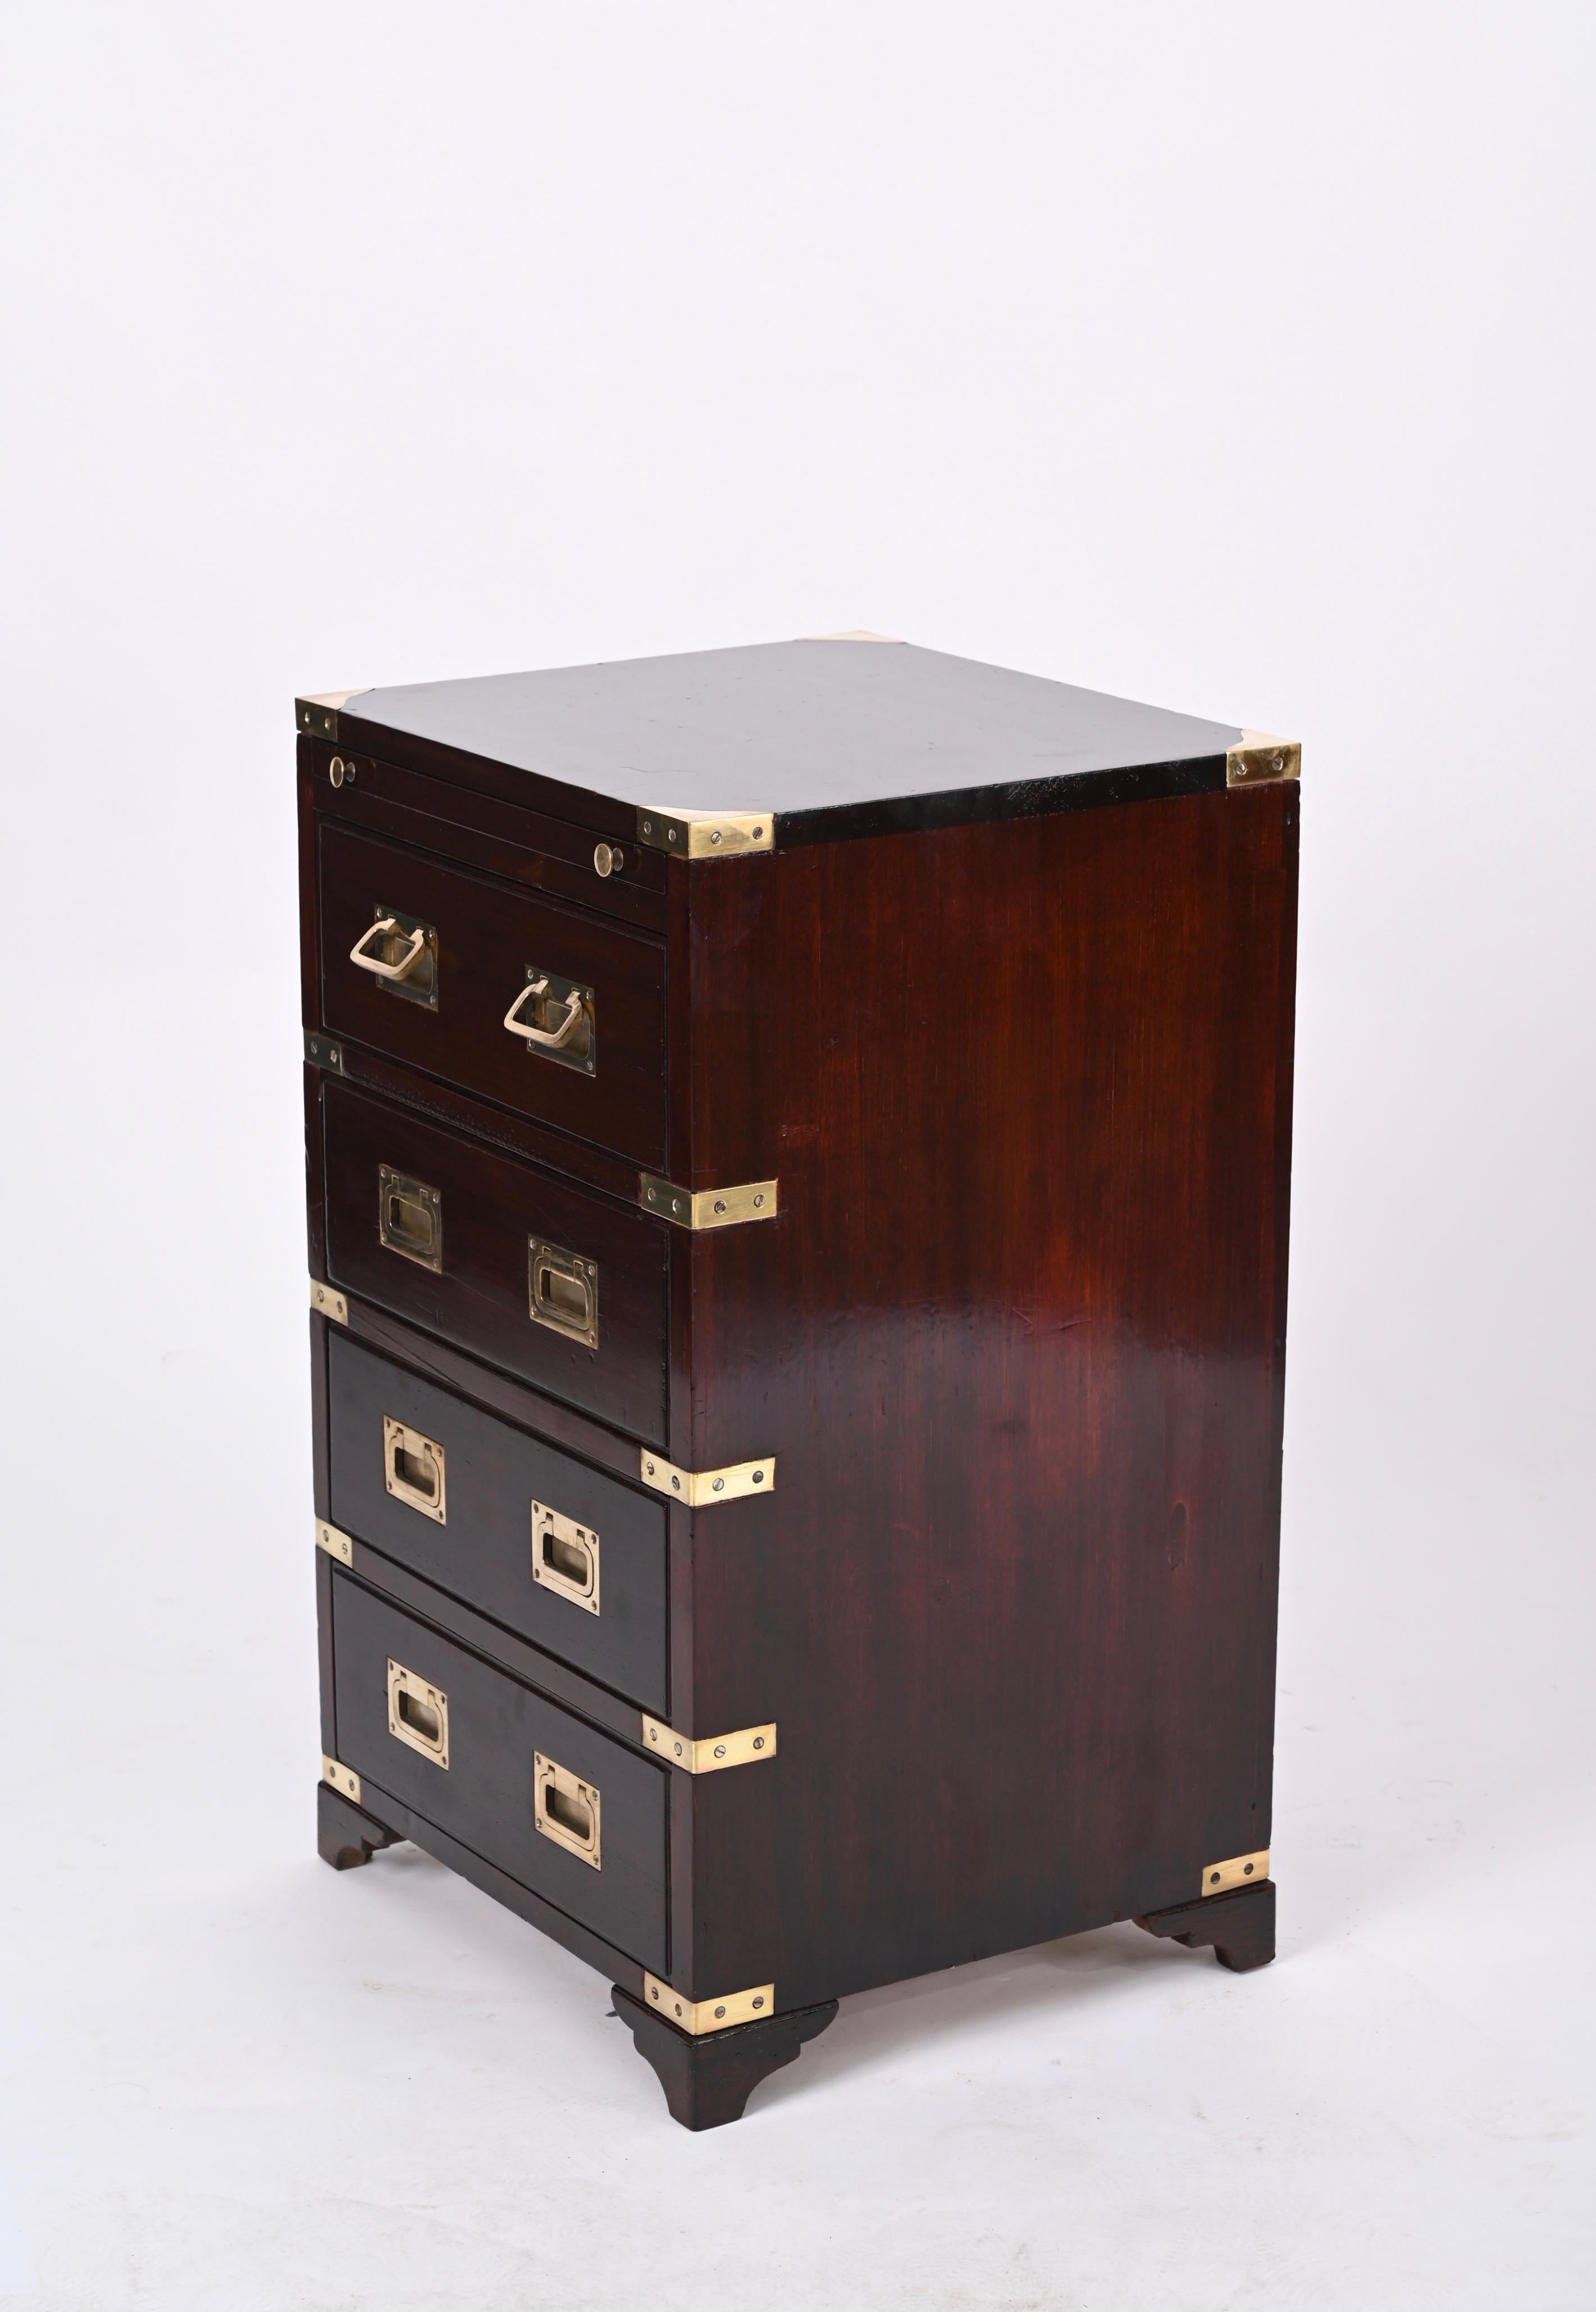 20th Century Military Chest of Drawers, Wood and Brass with Writing Desk, England, 1950s